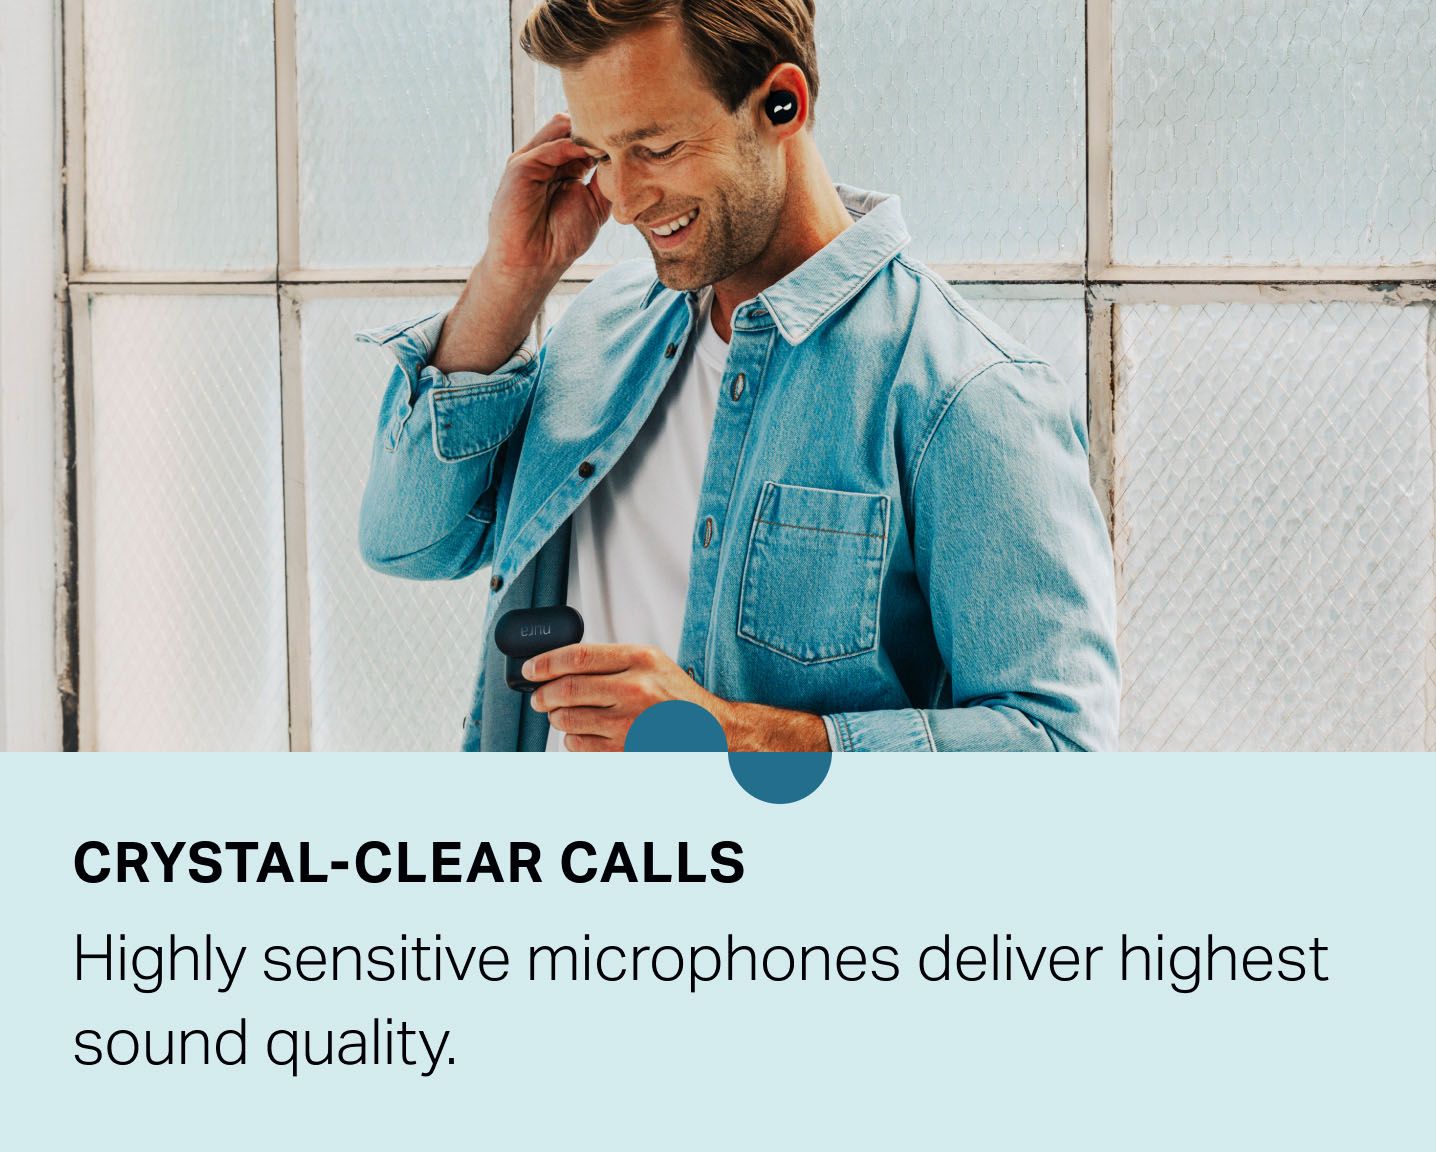 Person using NURATRUE earbuds to make a phone call — "Crystal-clear calls: Highly sensitive microphones deliver highest sound quality."